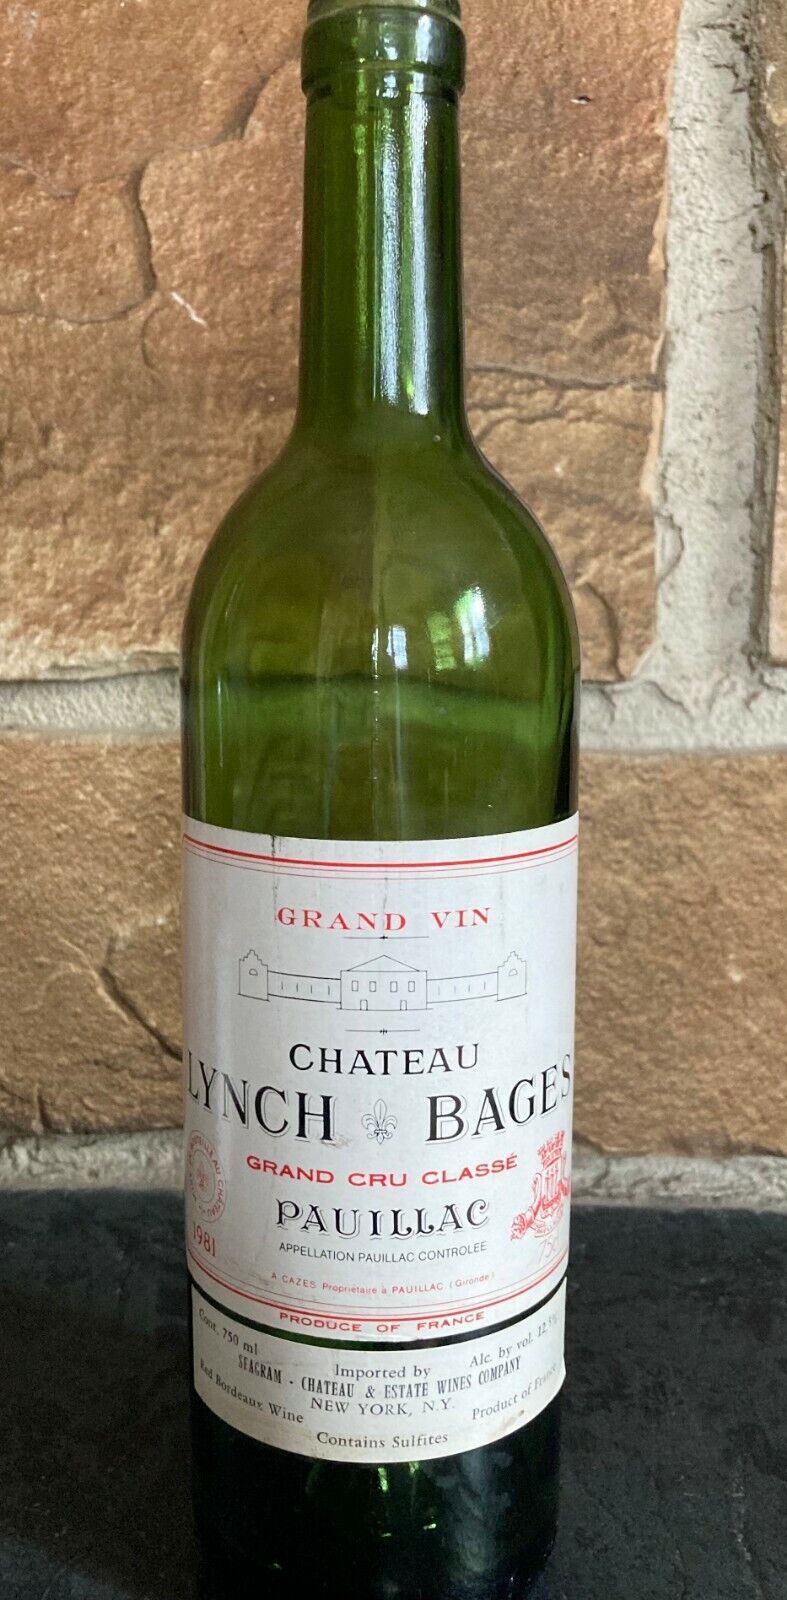 Vintage 1981 Chateau Lynch Bages Empty Wine Bottle with cork